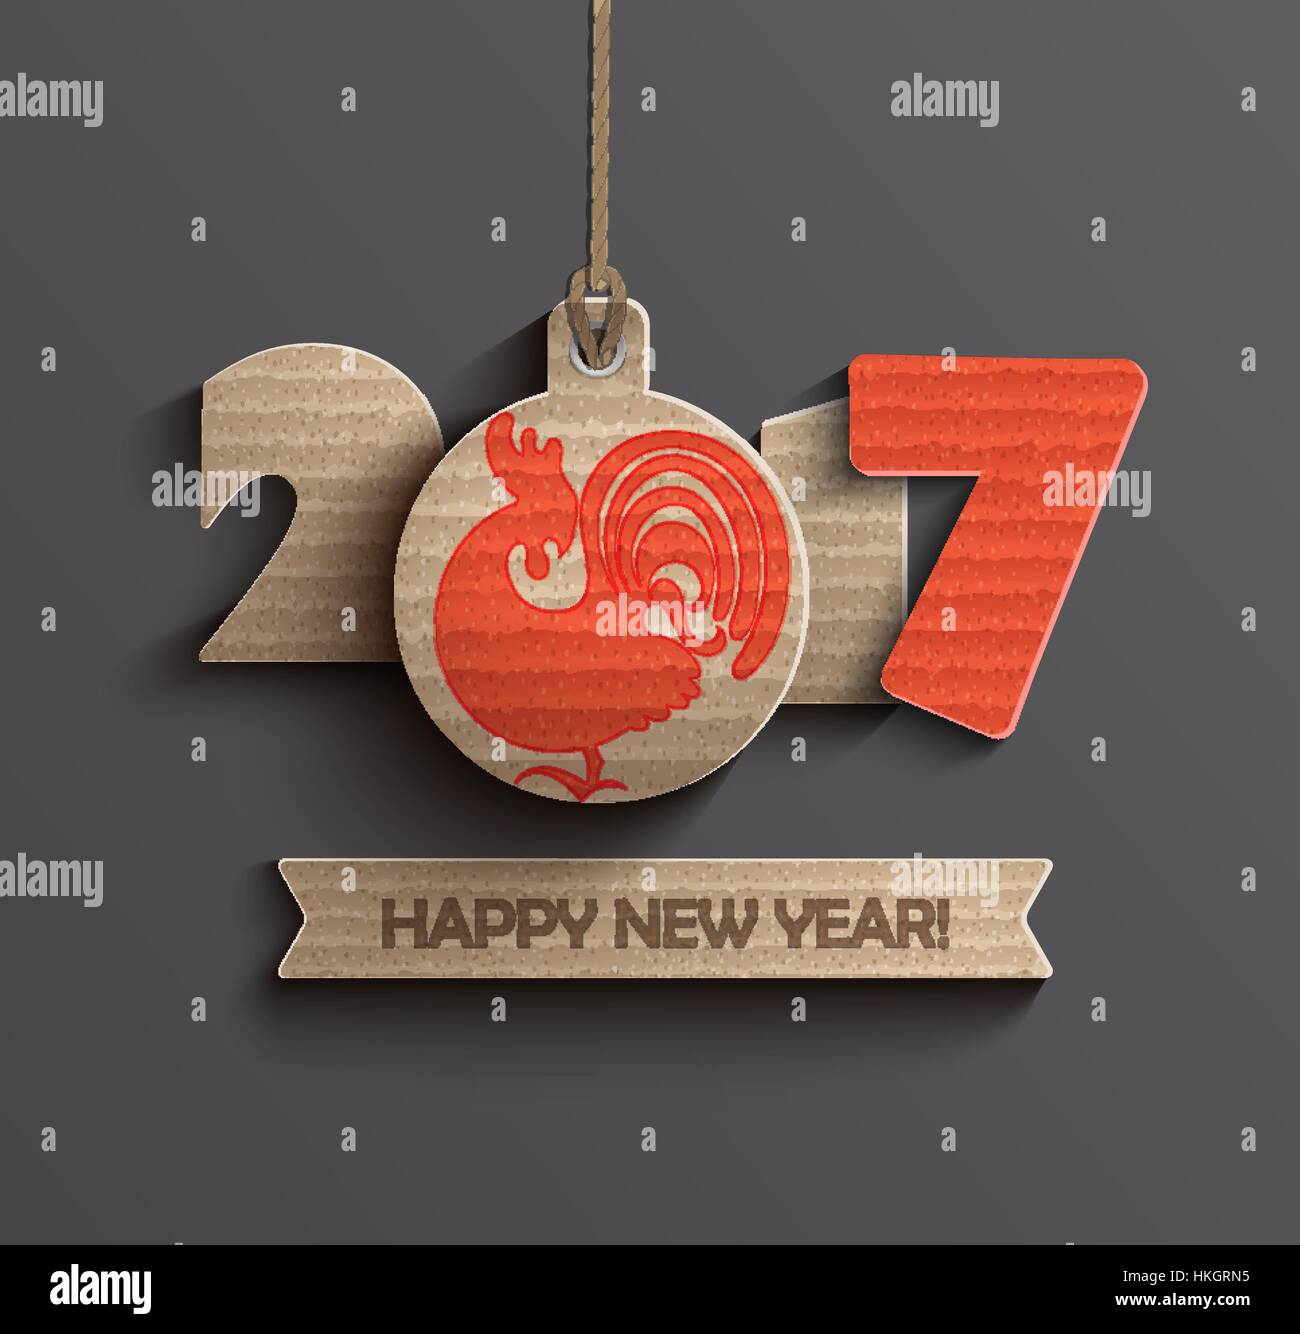 Happy New Year 2017. Year of roster 2017 with ribbon and text happy new year. Vector illustration. Stock Vector